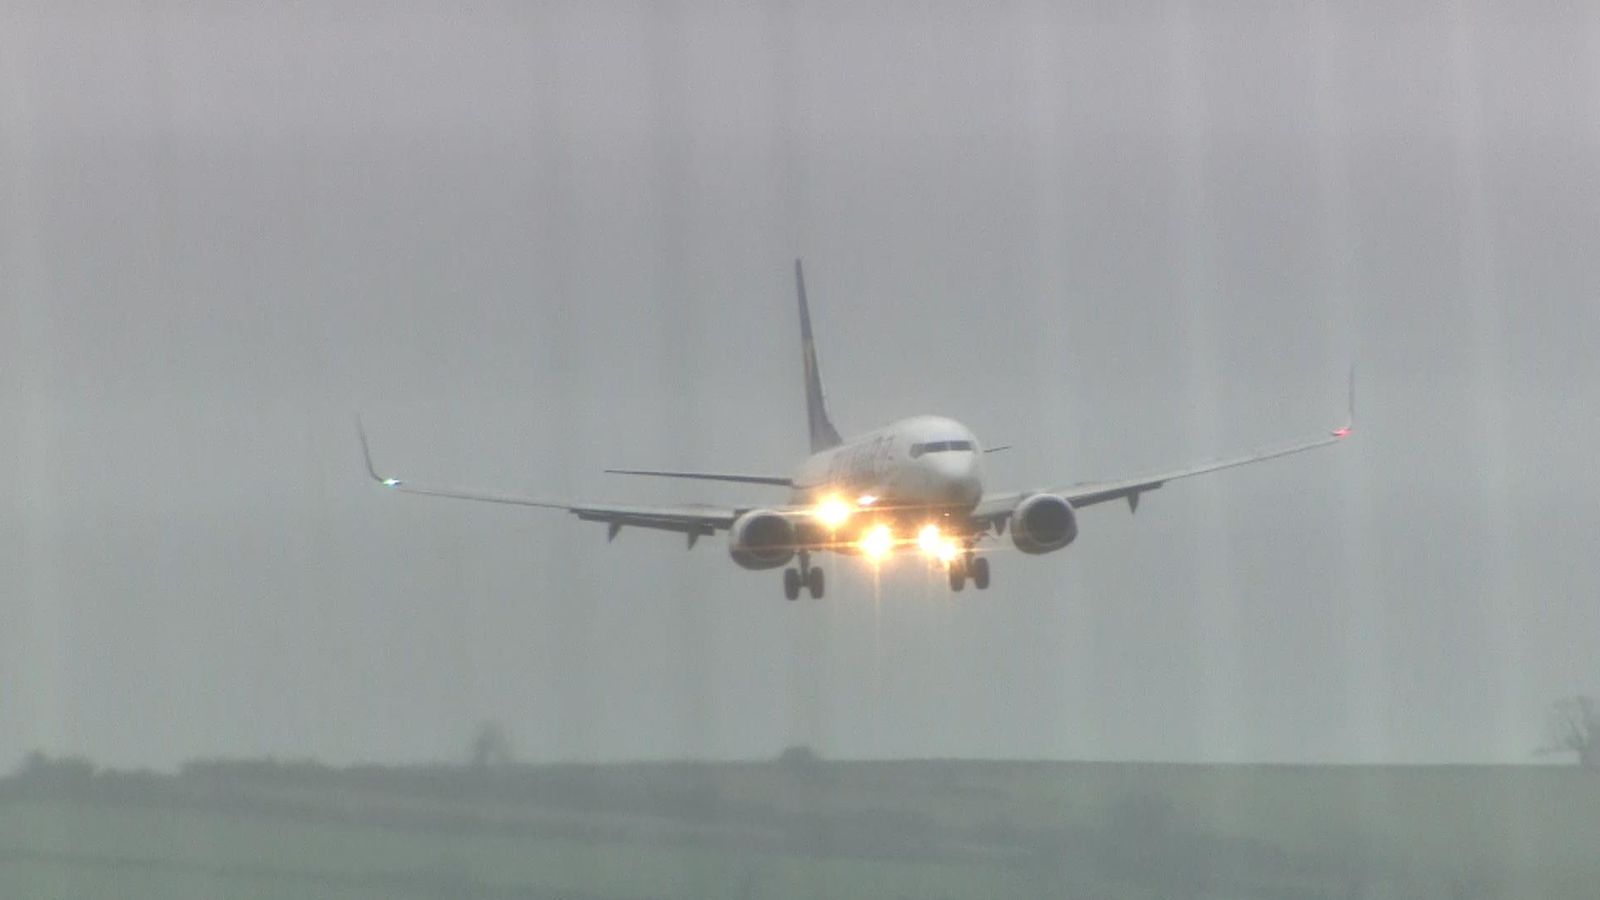 Planes at Bristol Airport struggle to land and some British Airways flights at Heathrow cancelled as Storm Gerrit winds hit UK